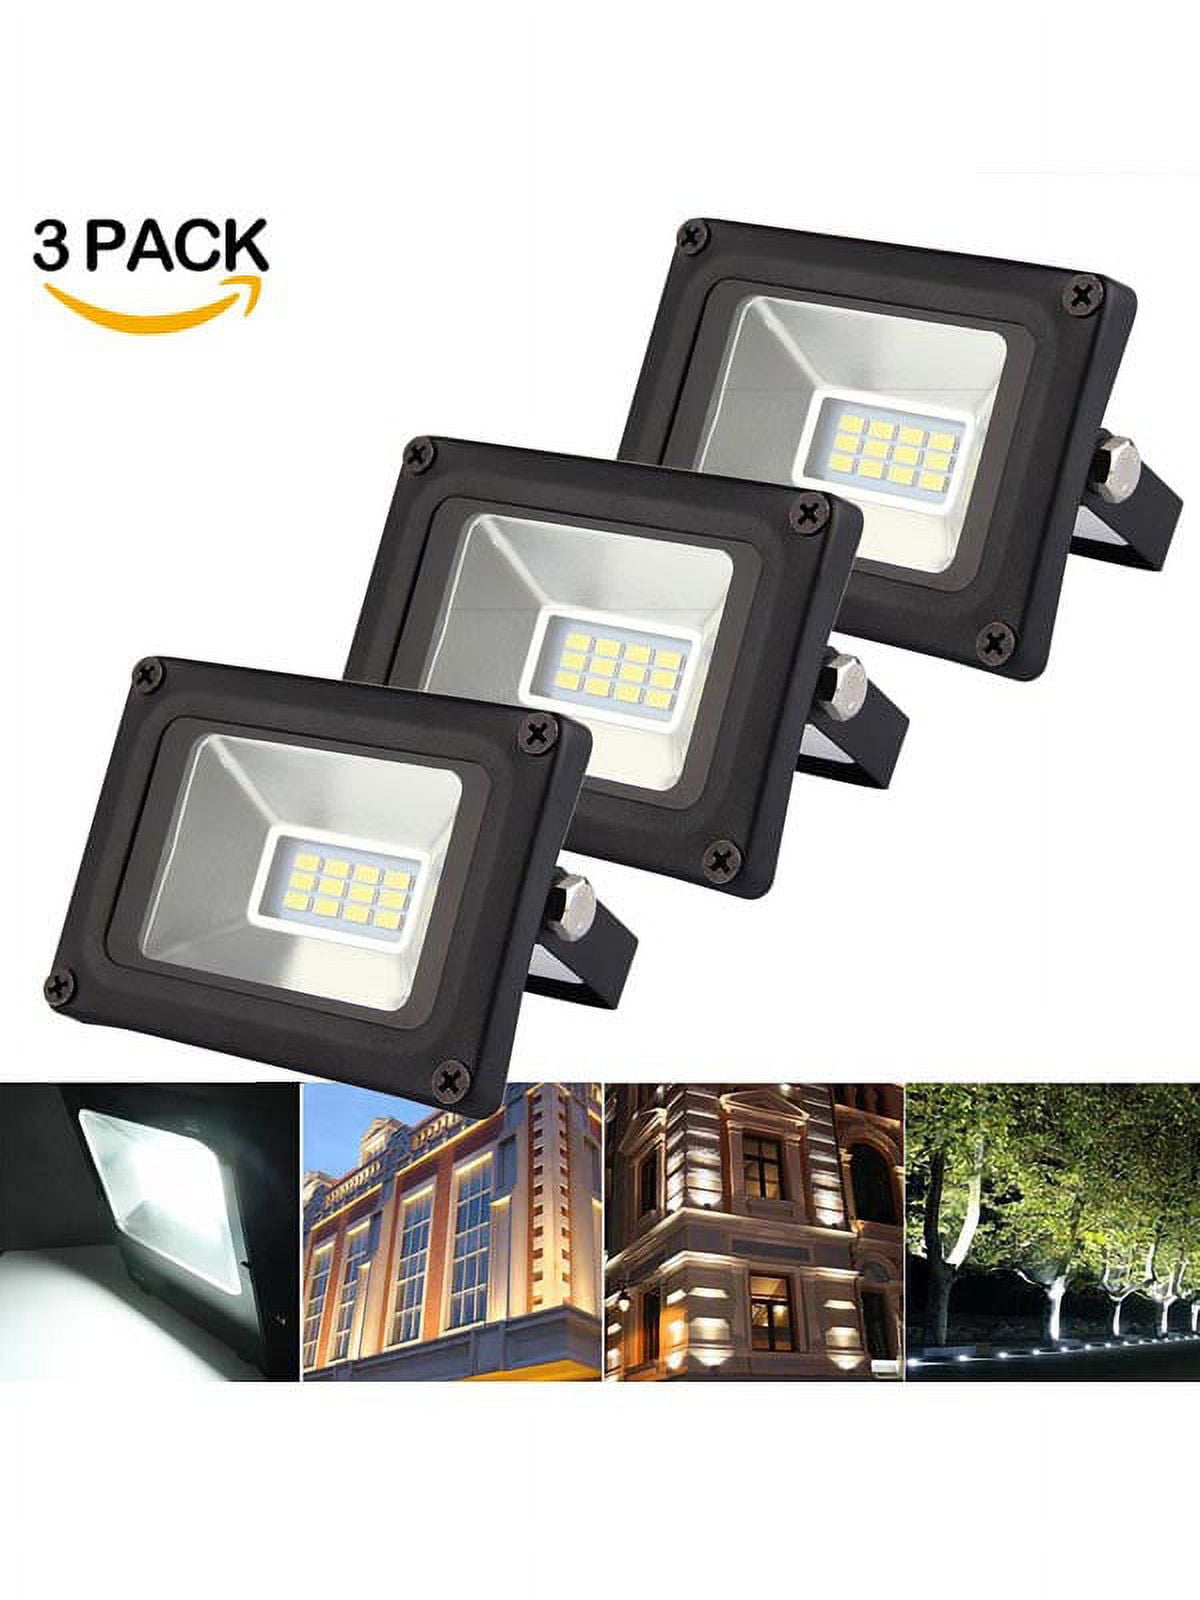 Pack 10W LED SMD Flood Light- Waterproof IP65 for outdoor,Cool White Spot lights  Outdoor Lamp Security Lights for Garden Lighting